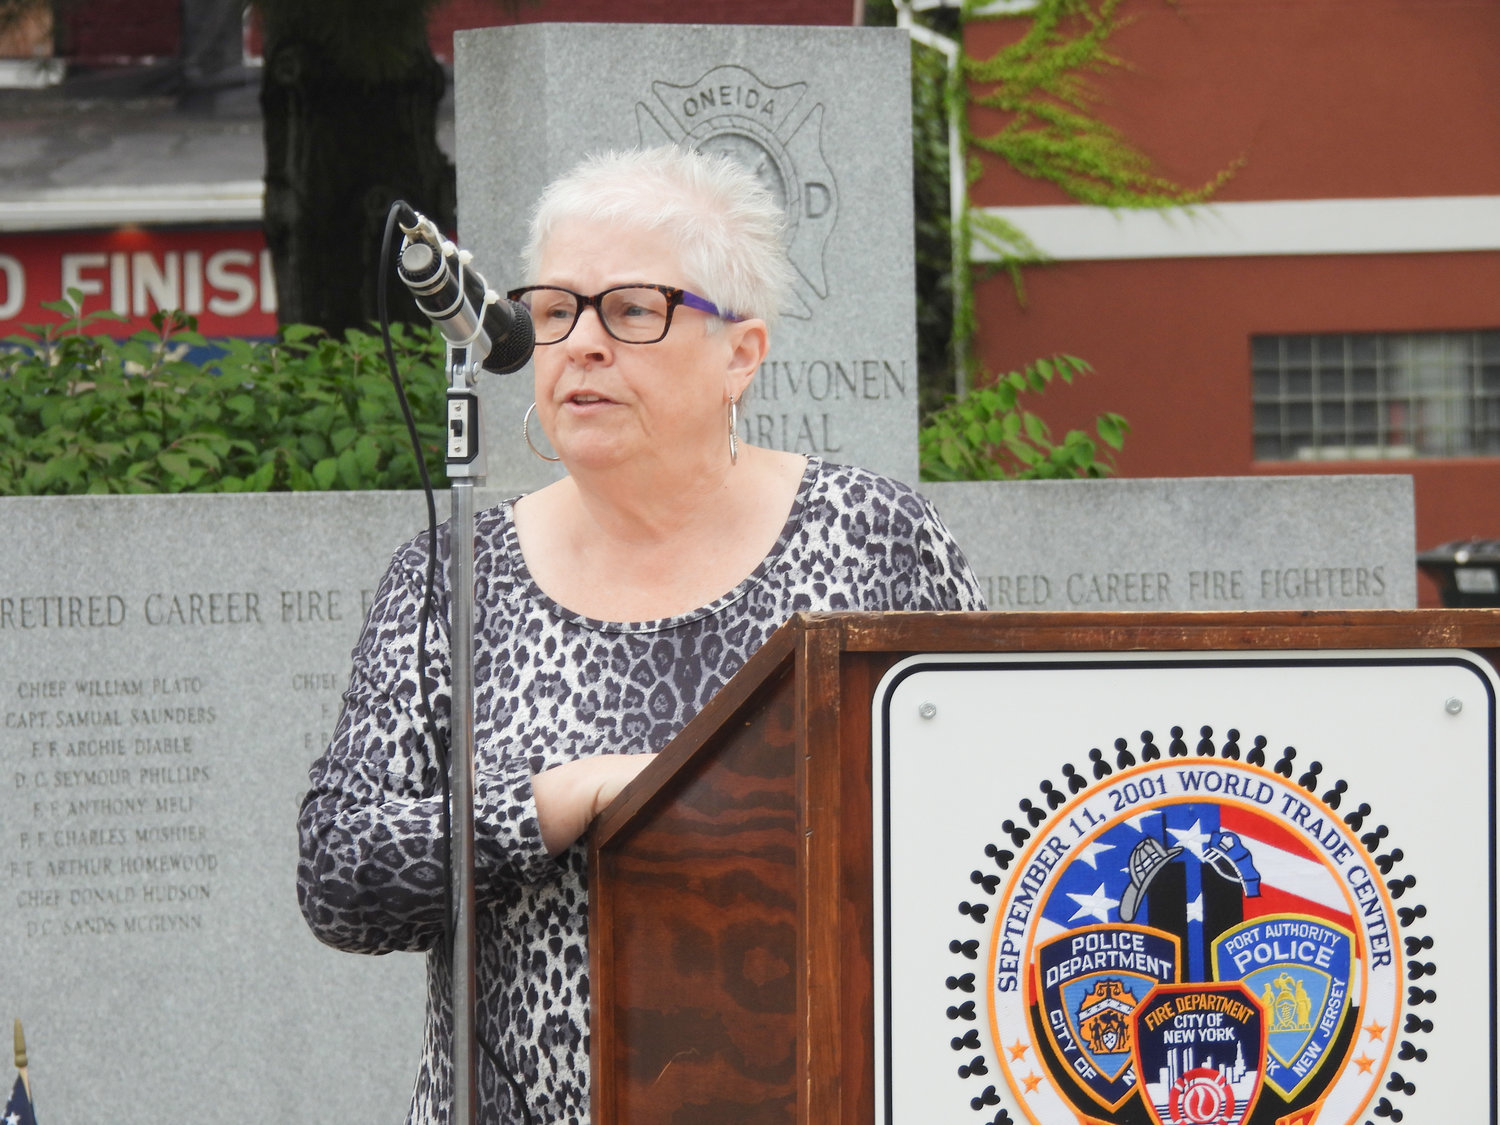 Mayor Helen Acker speaks at the city of Oneida's 9/11 Ceremony on Sunday, asking people to never forget what happened on that fateful day